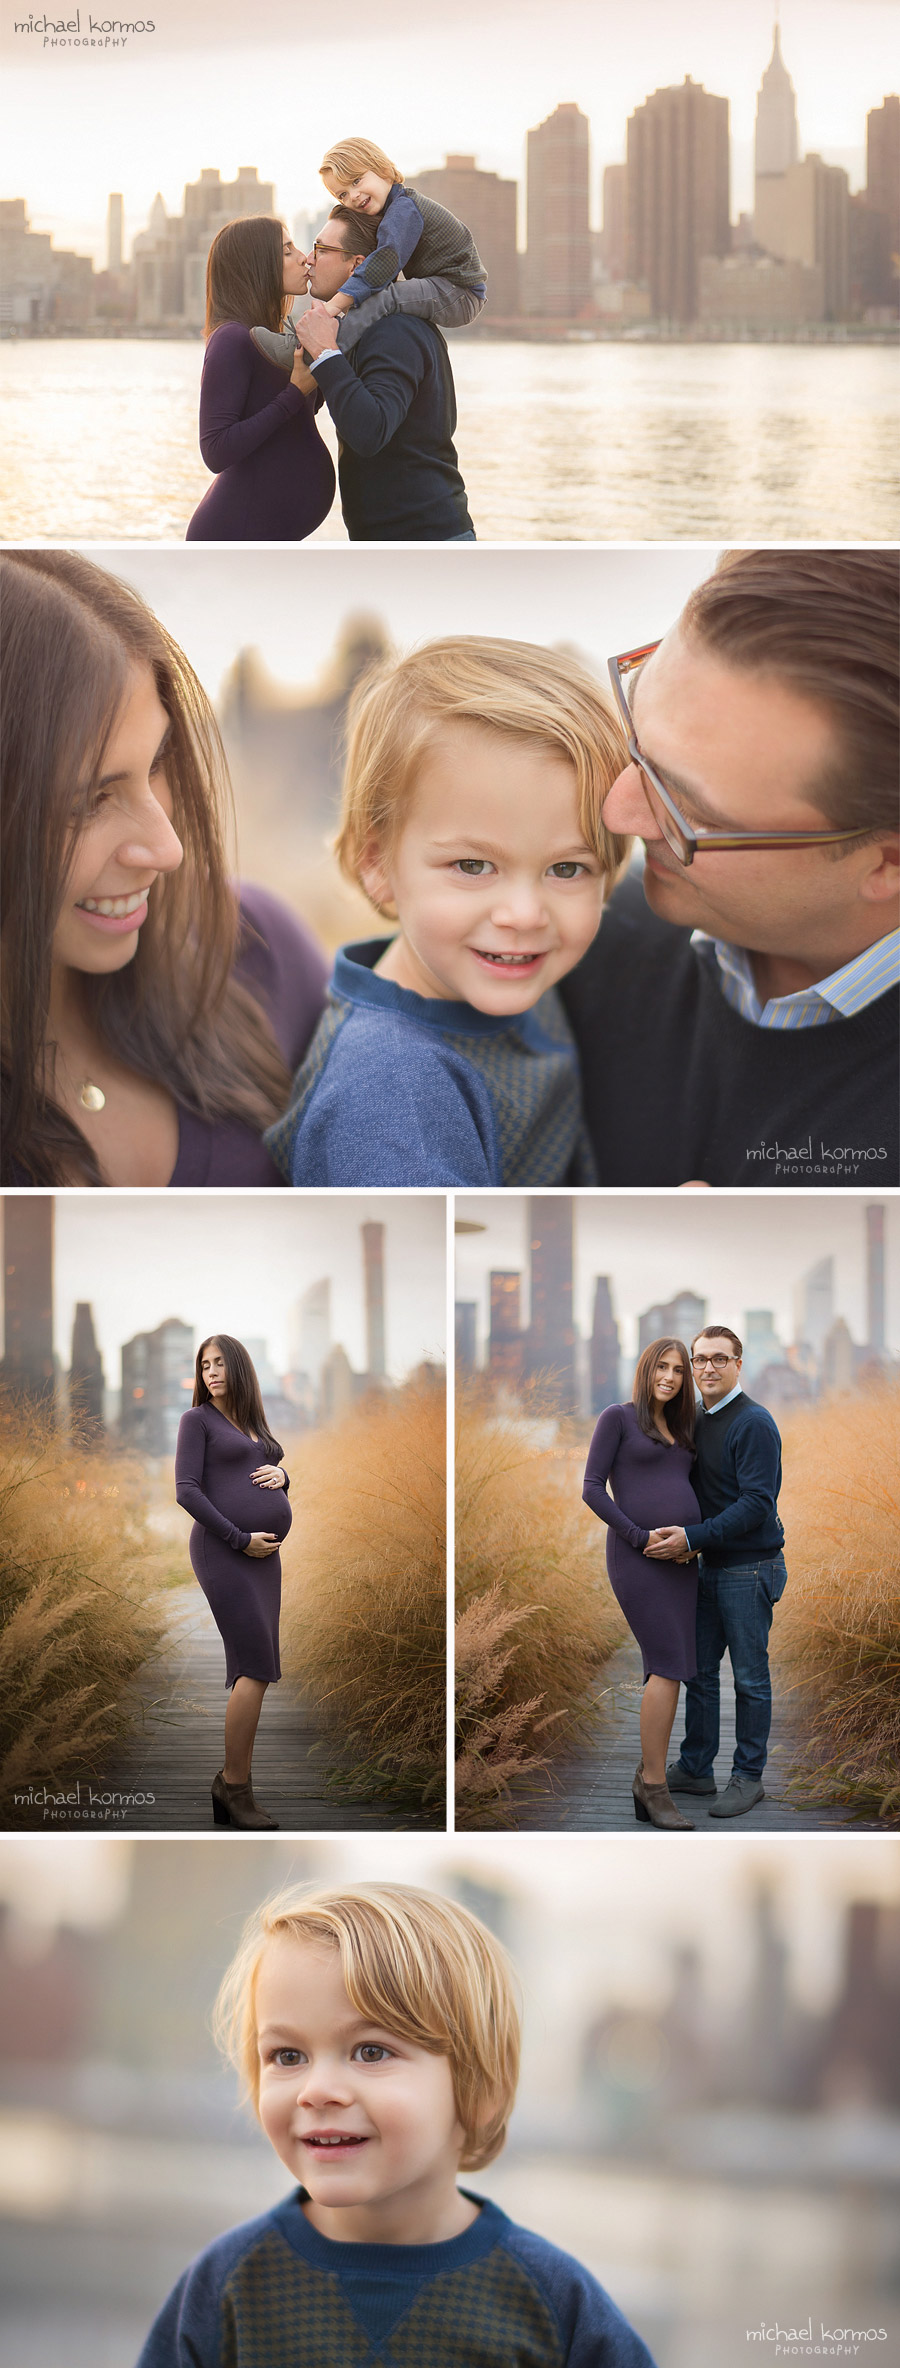 Outdoors Maternity Photography NYC